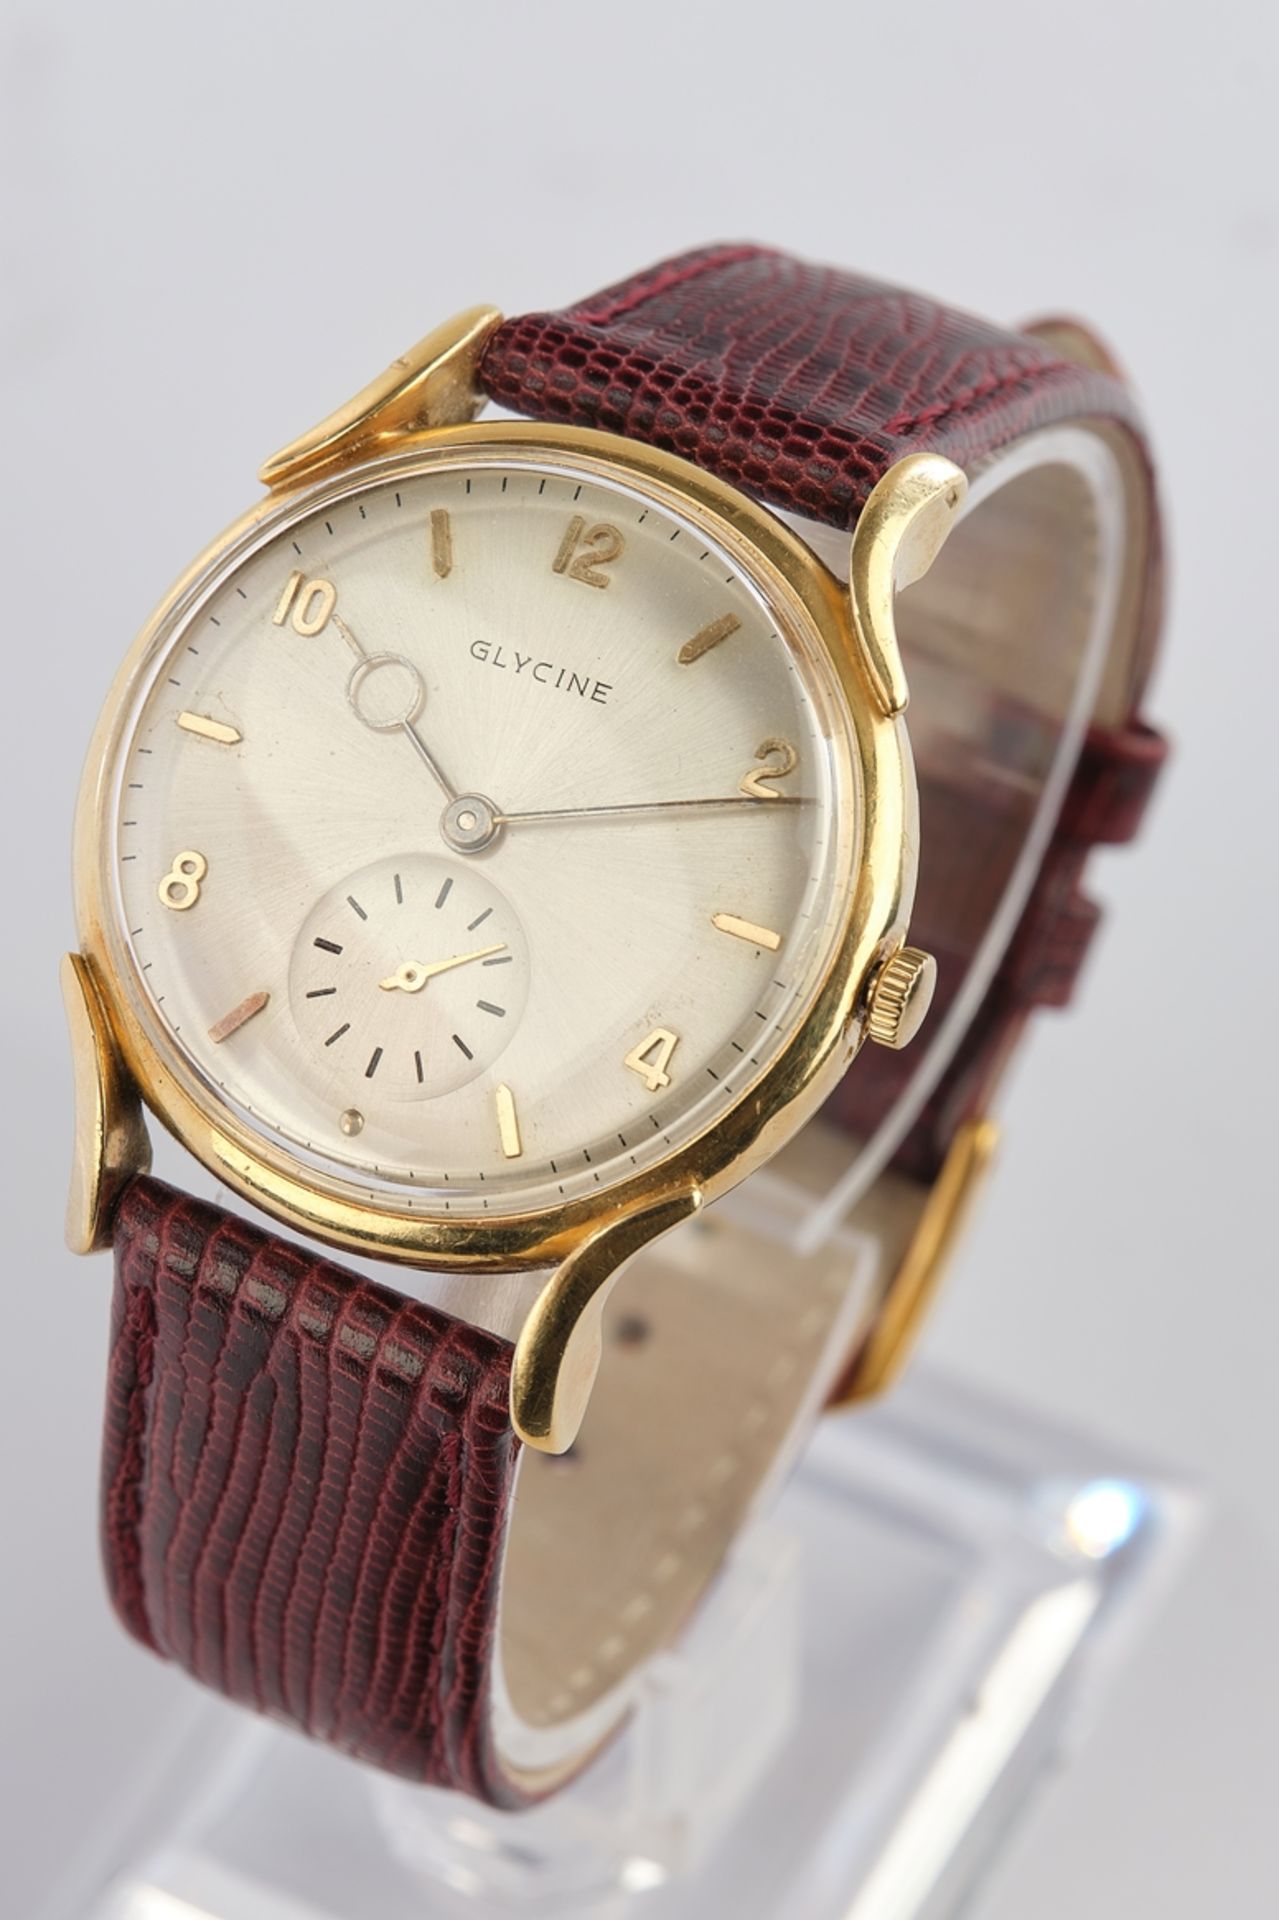 Glycine,, Men's wristwatch, Switzerland, 1950/60s, case GG 750, manual winding, silver dial with go - Image 2 of 3